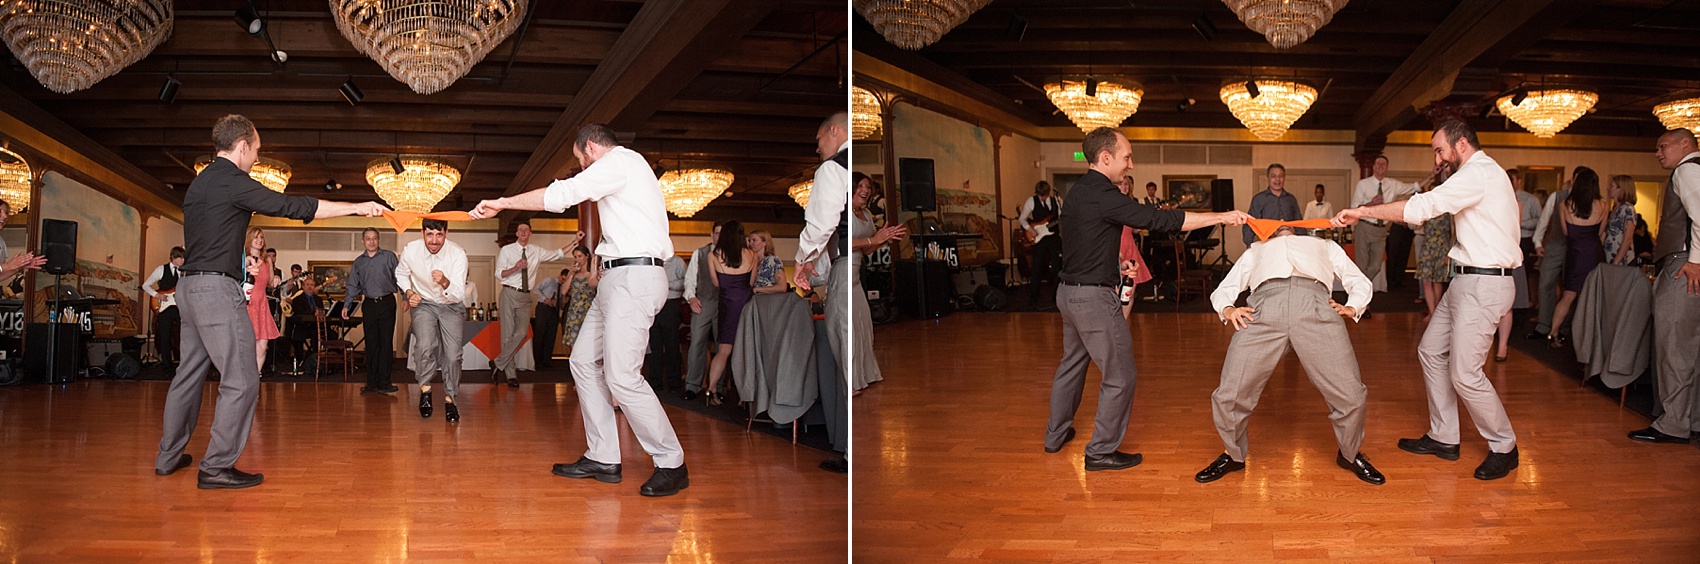 Napkin limbo at this 1840s Ballroom wedding in Baltimore, Maryland wedding. Photos by Mikkel Paige Photography.